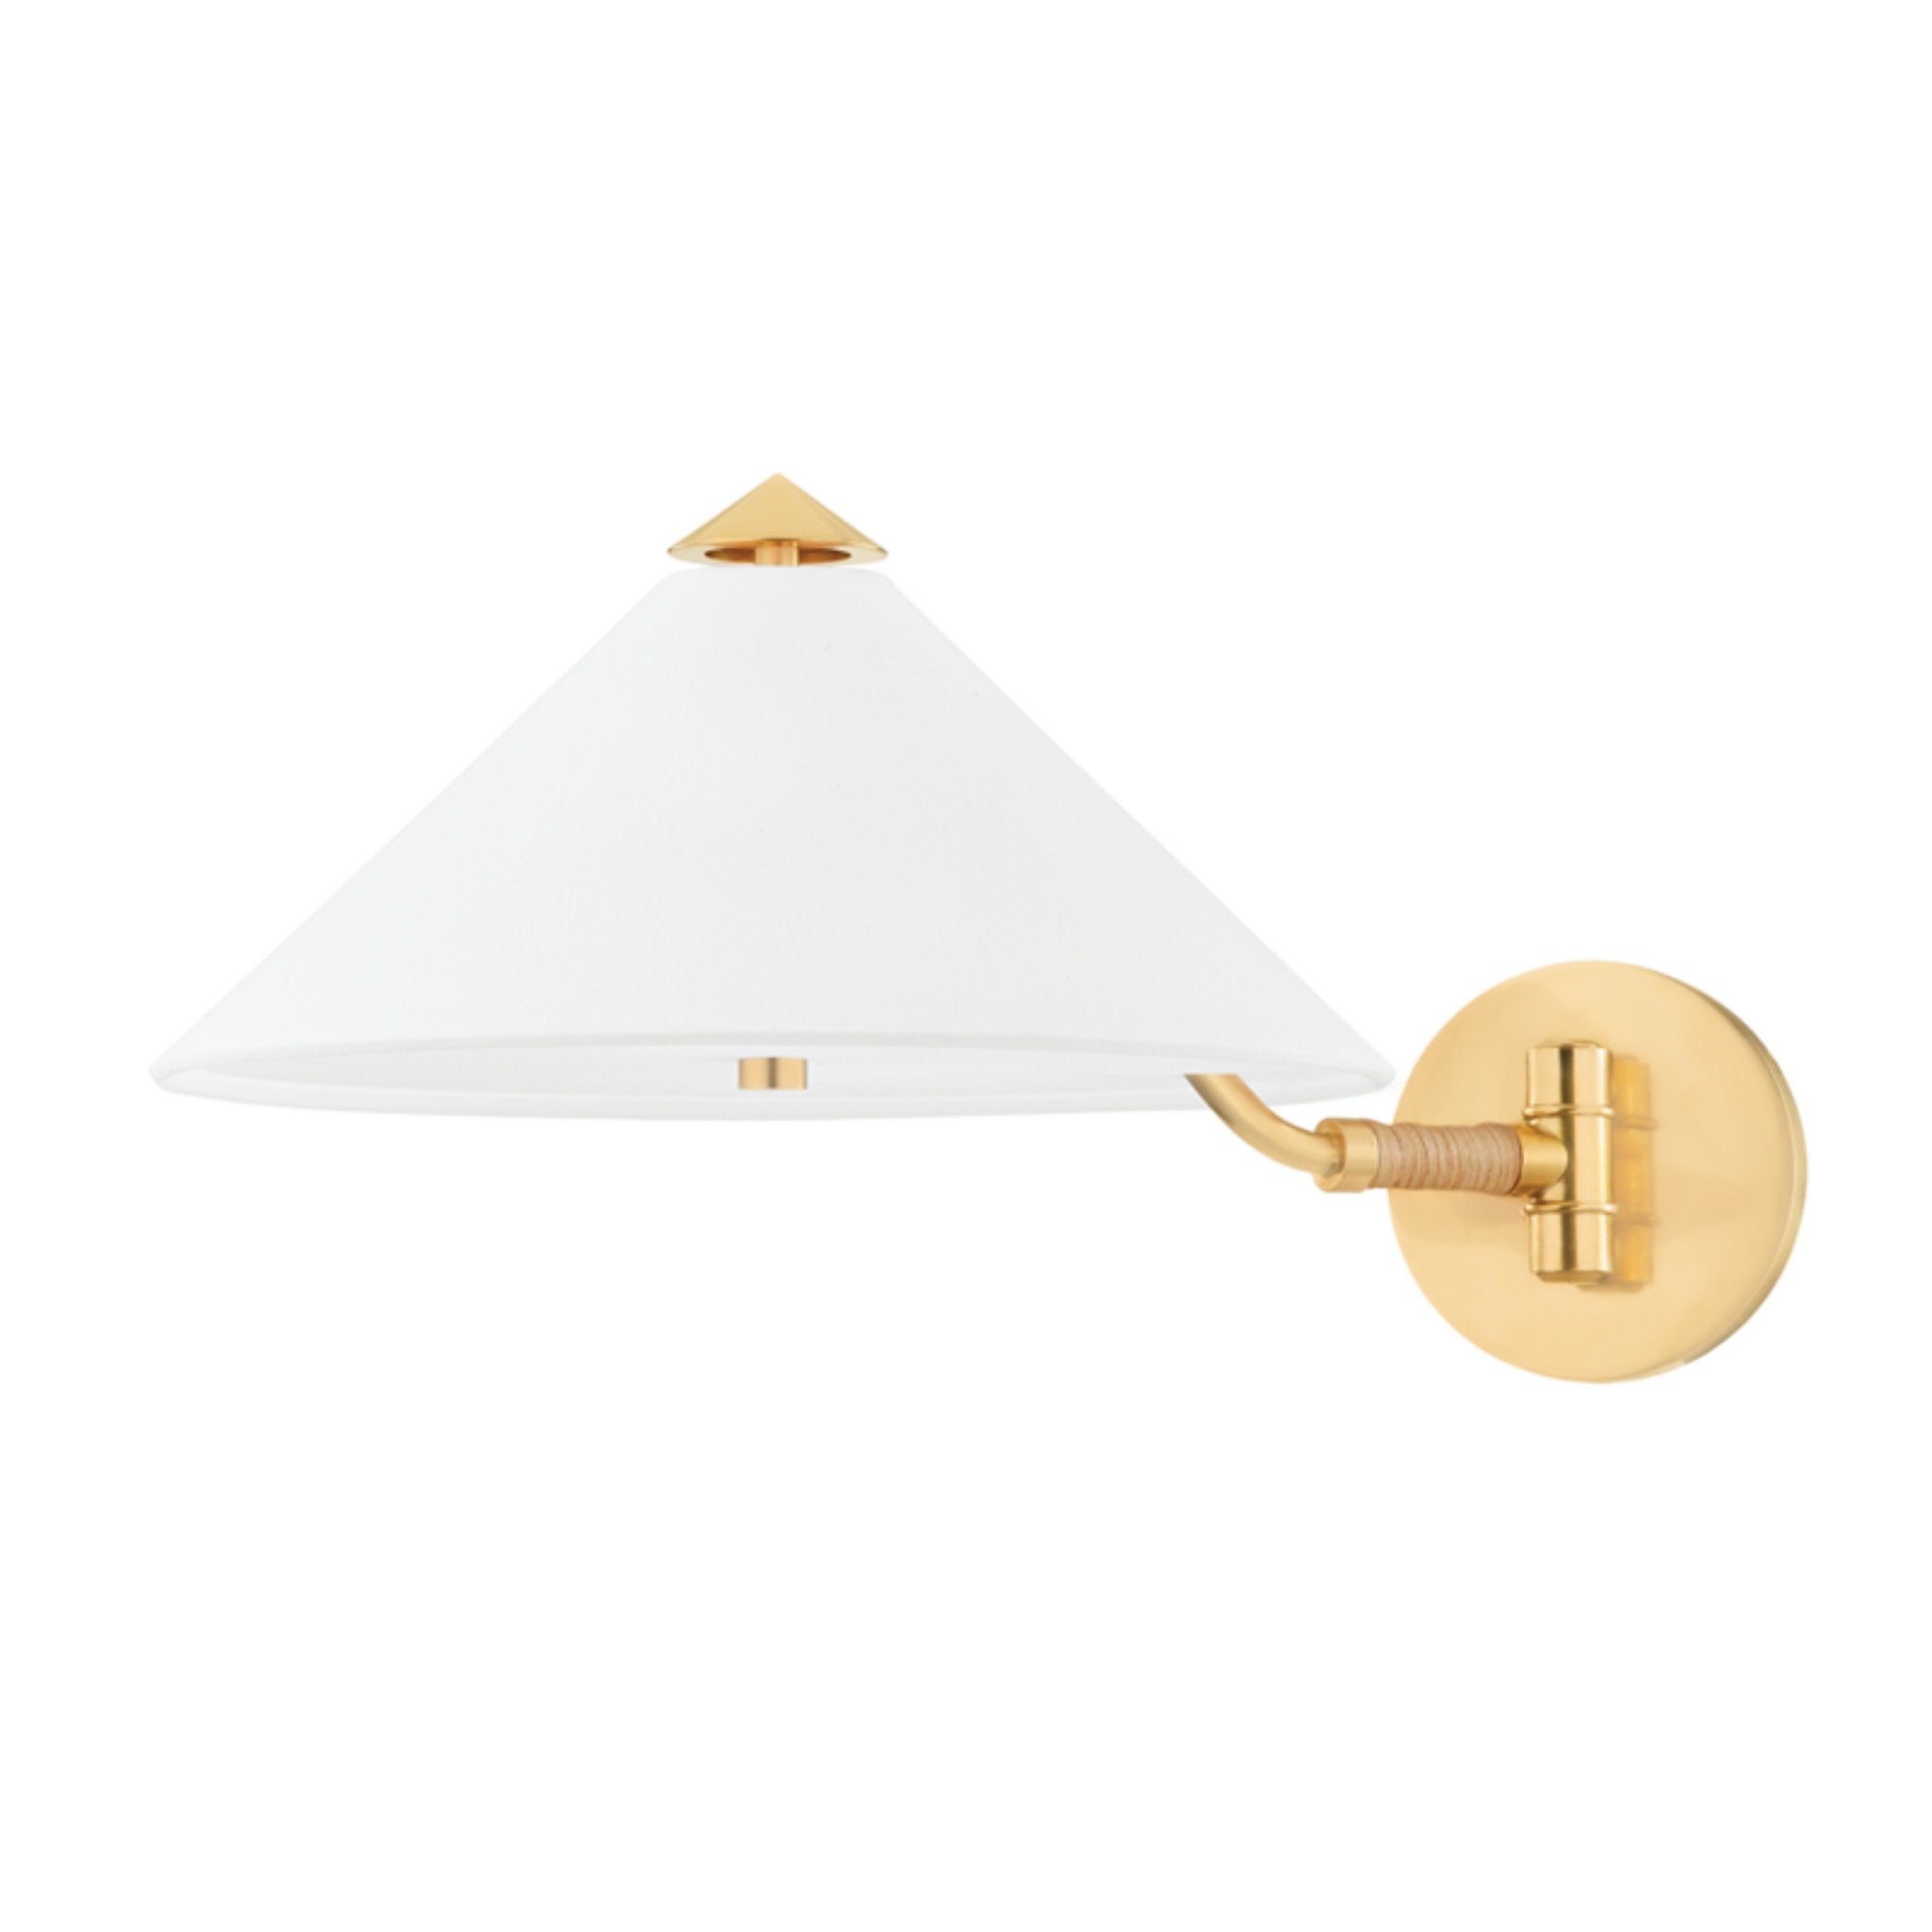 Williamsburg 2 Light Wall Sconce in Aged Brass